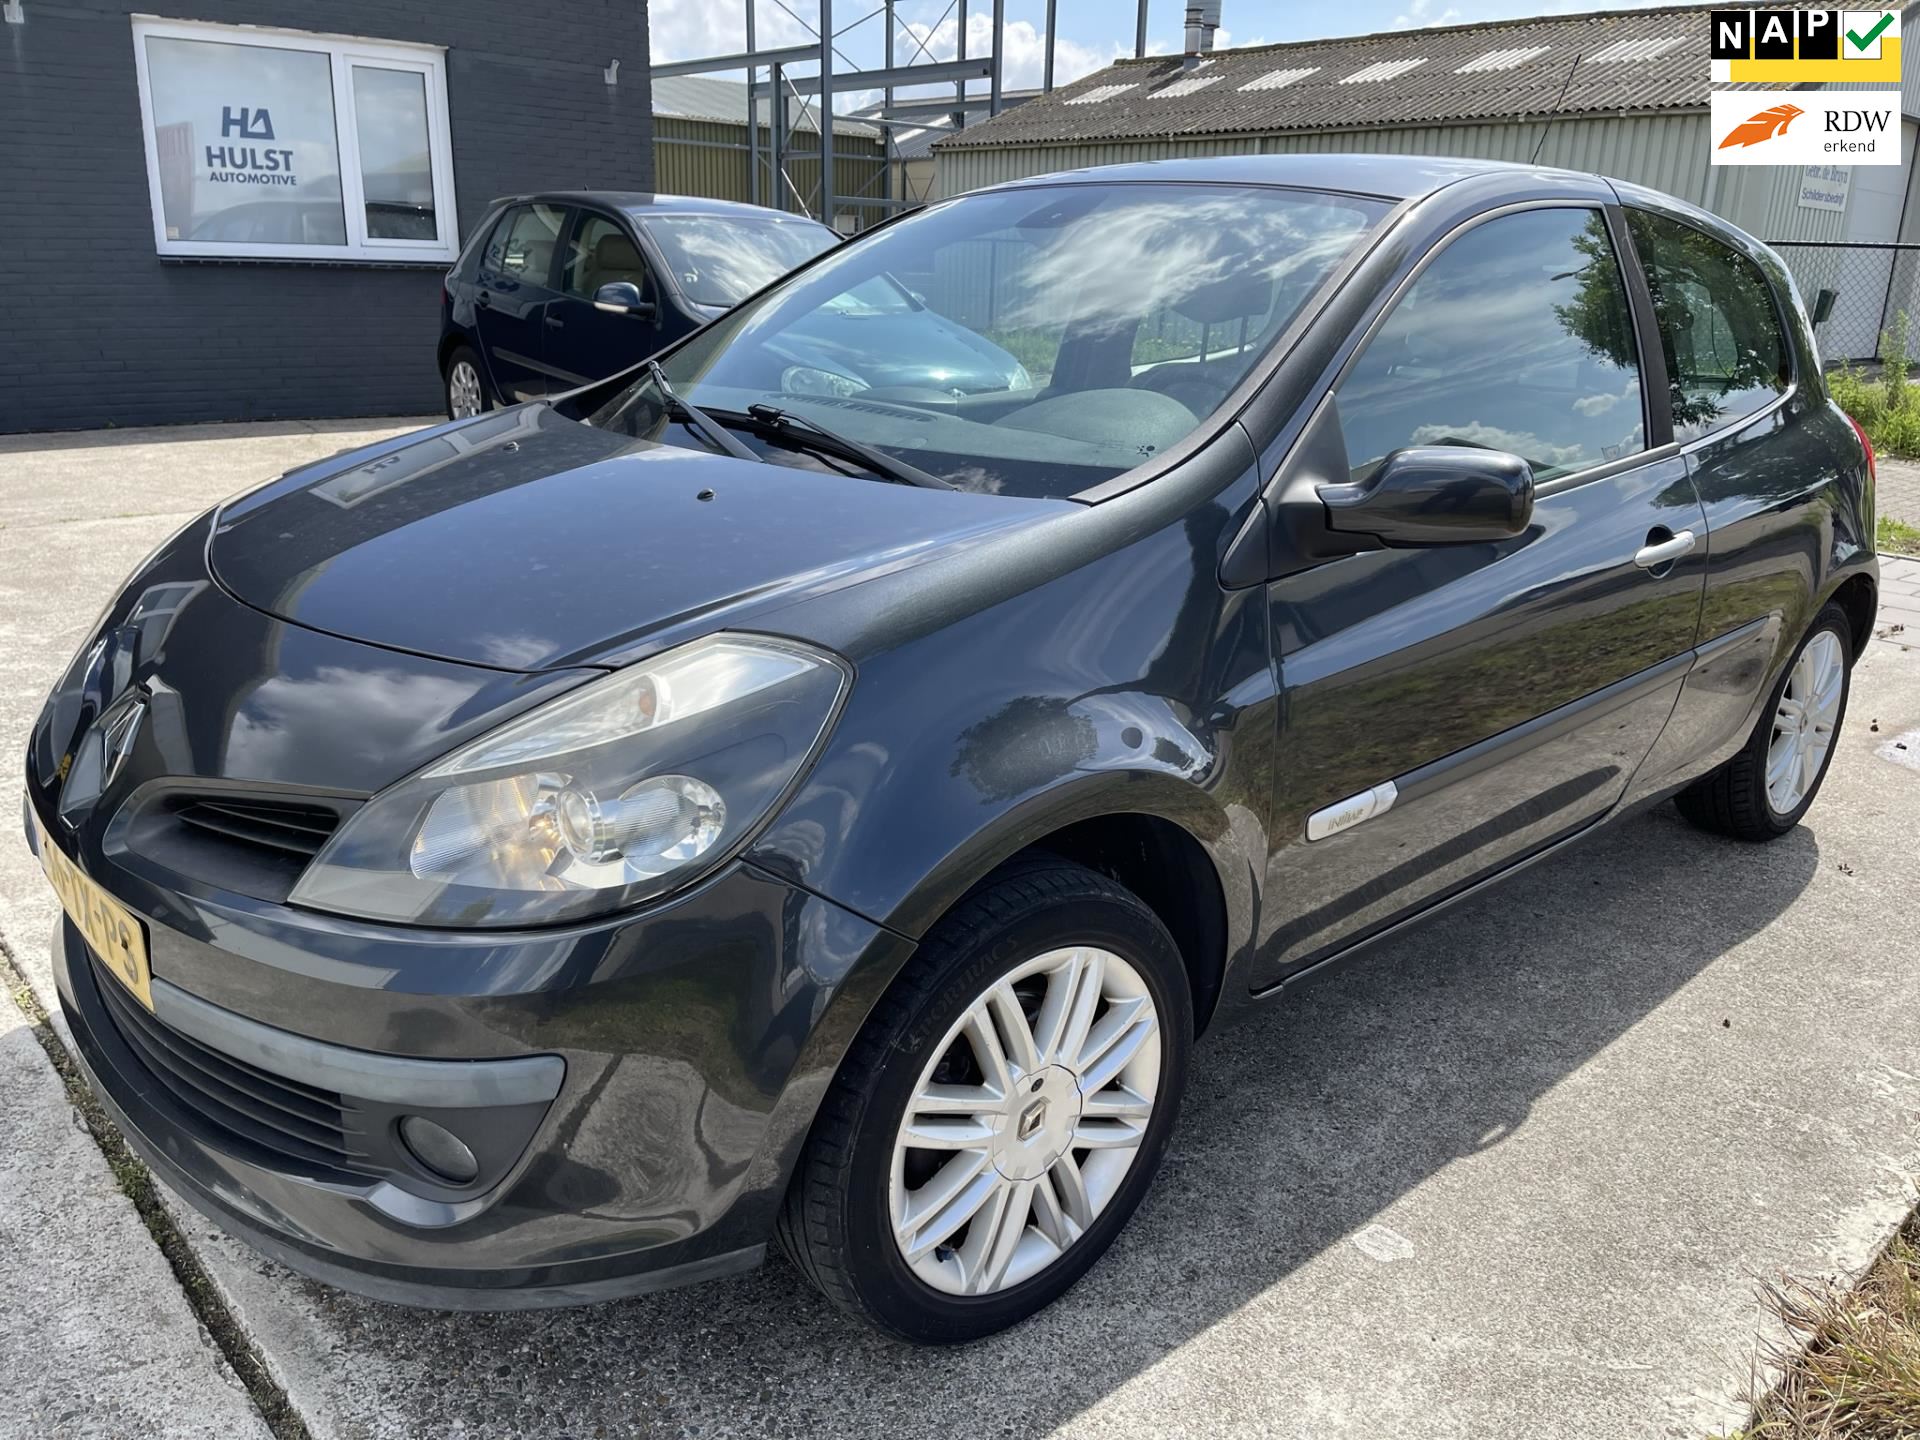 Renault Clio 2.0 16V Initiale occasion - Hulst Automotive